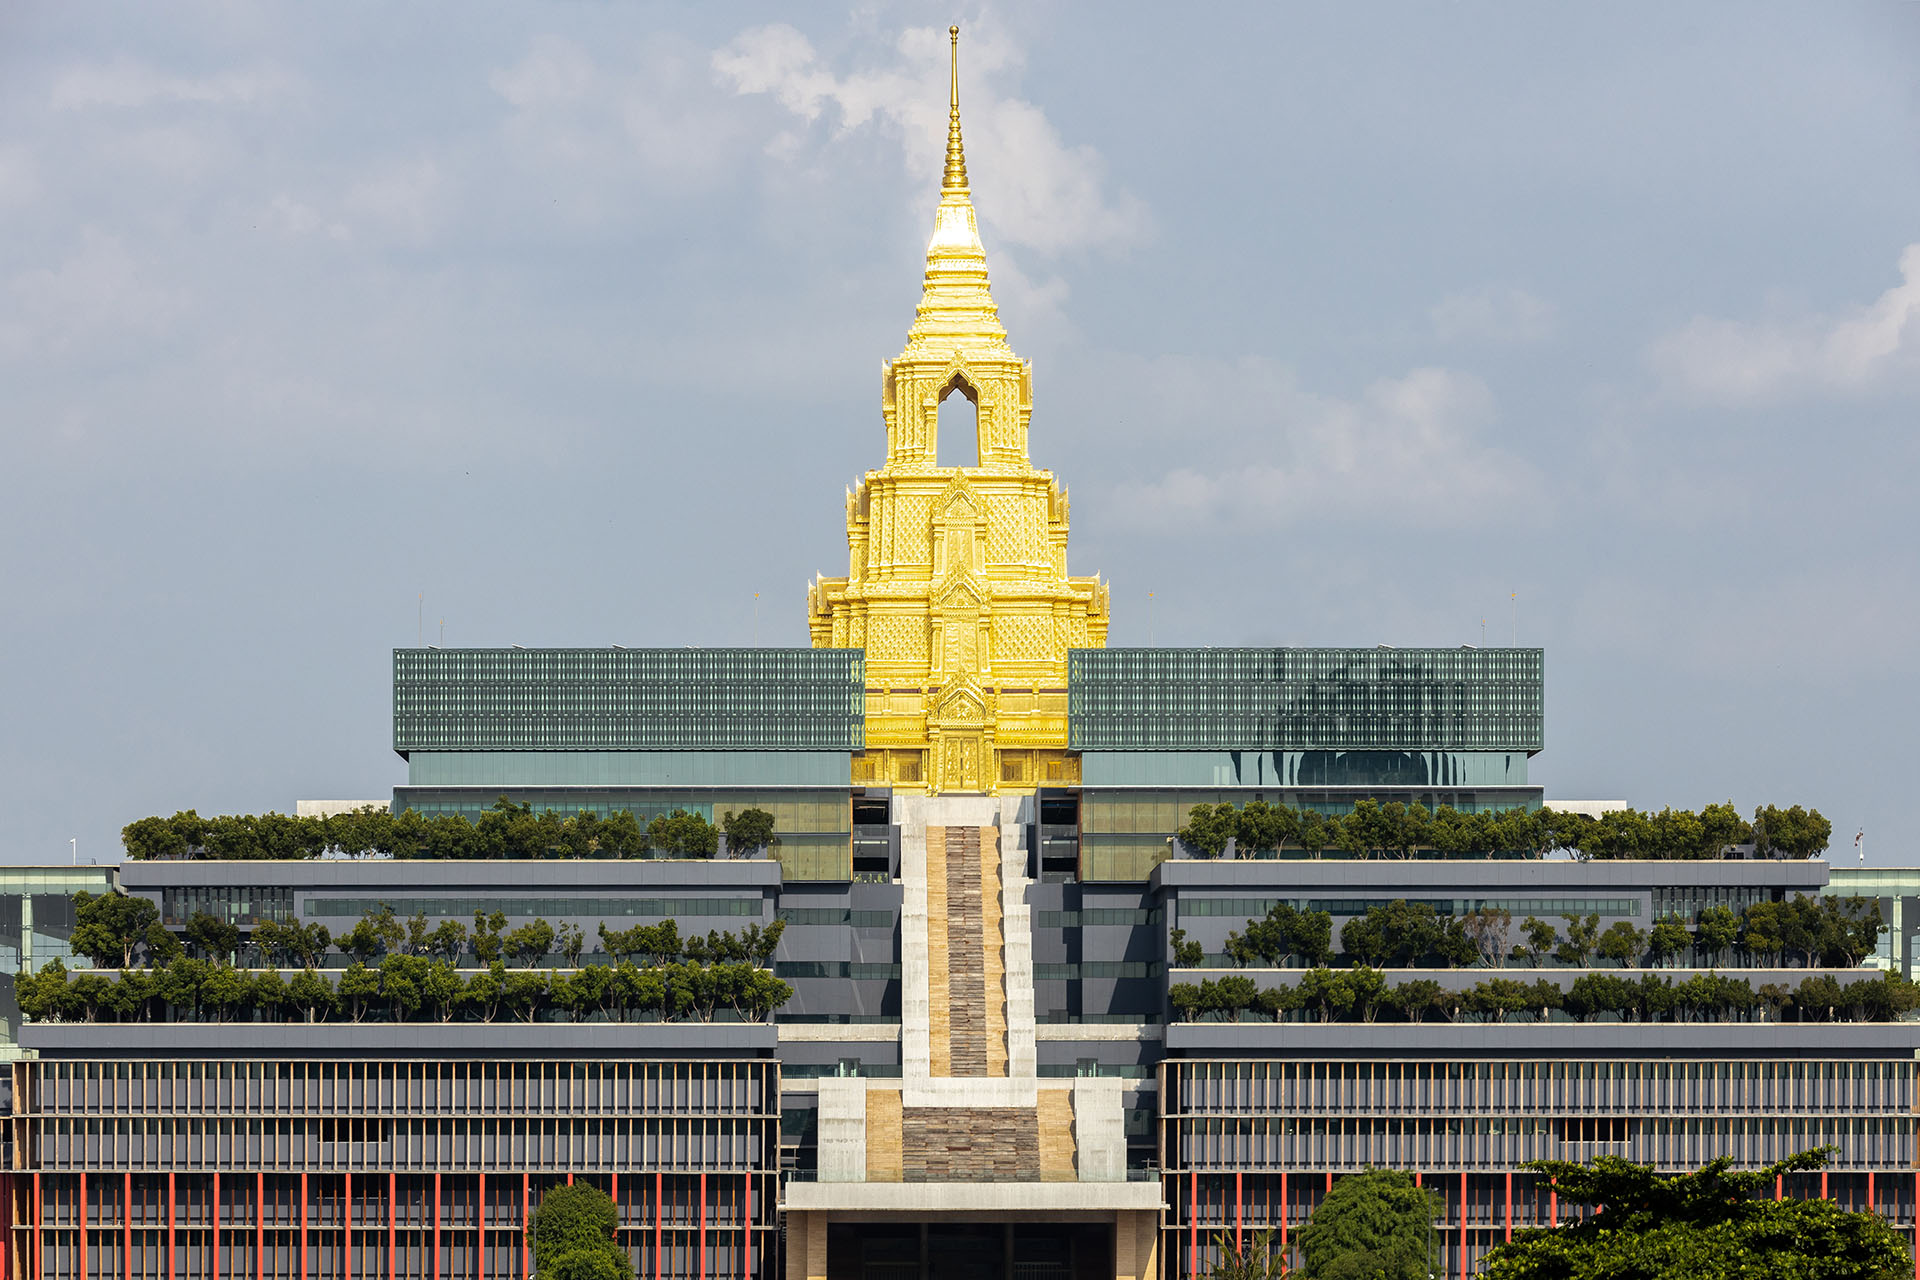 The Parliament building in Thailand